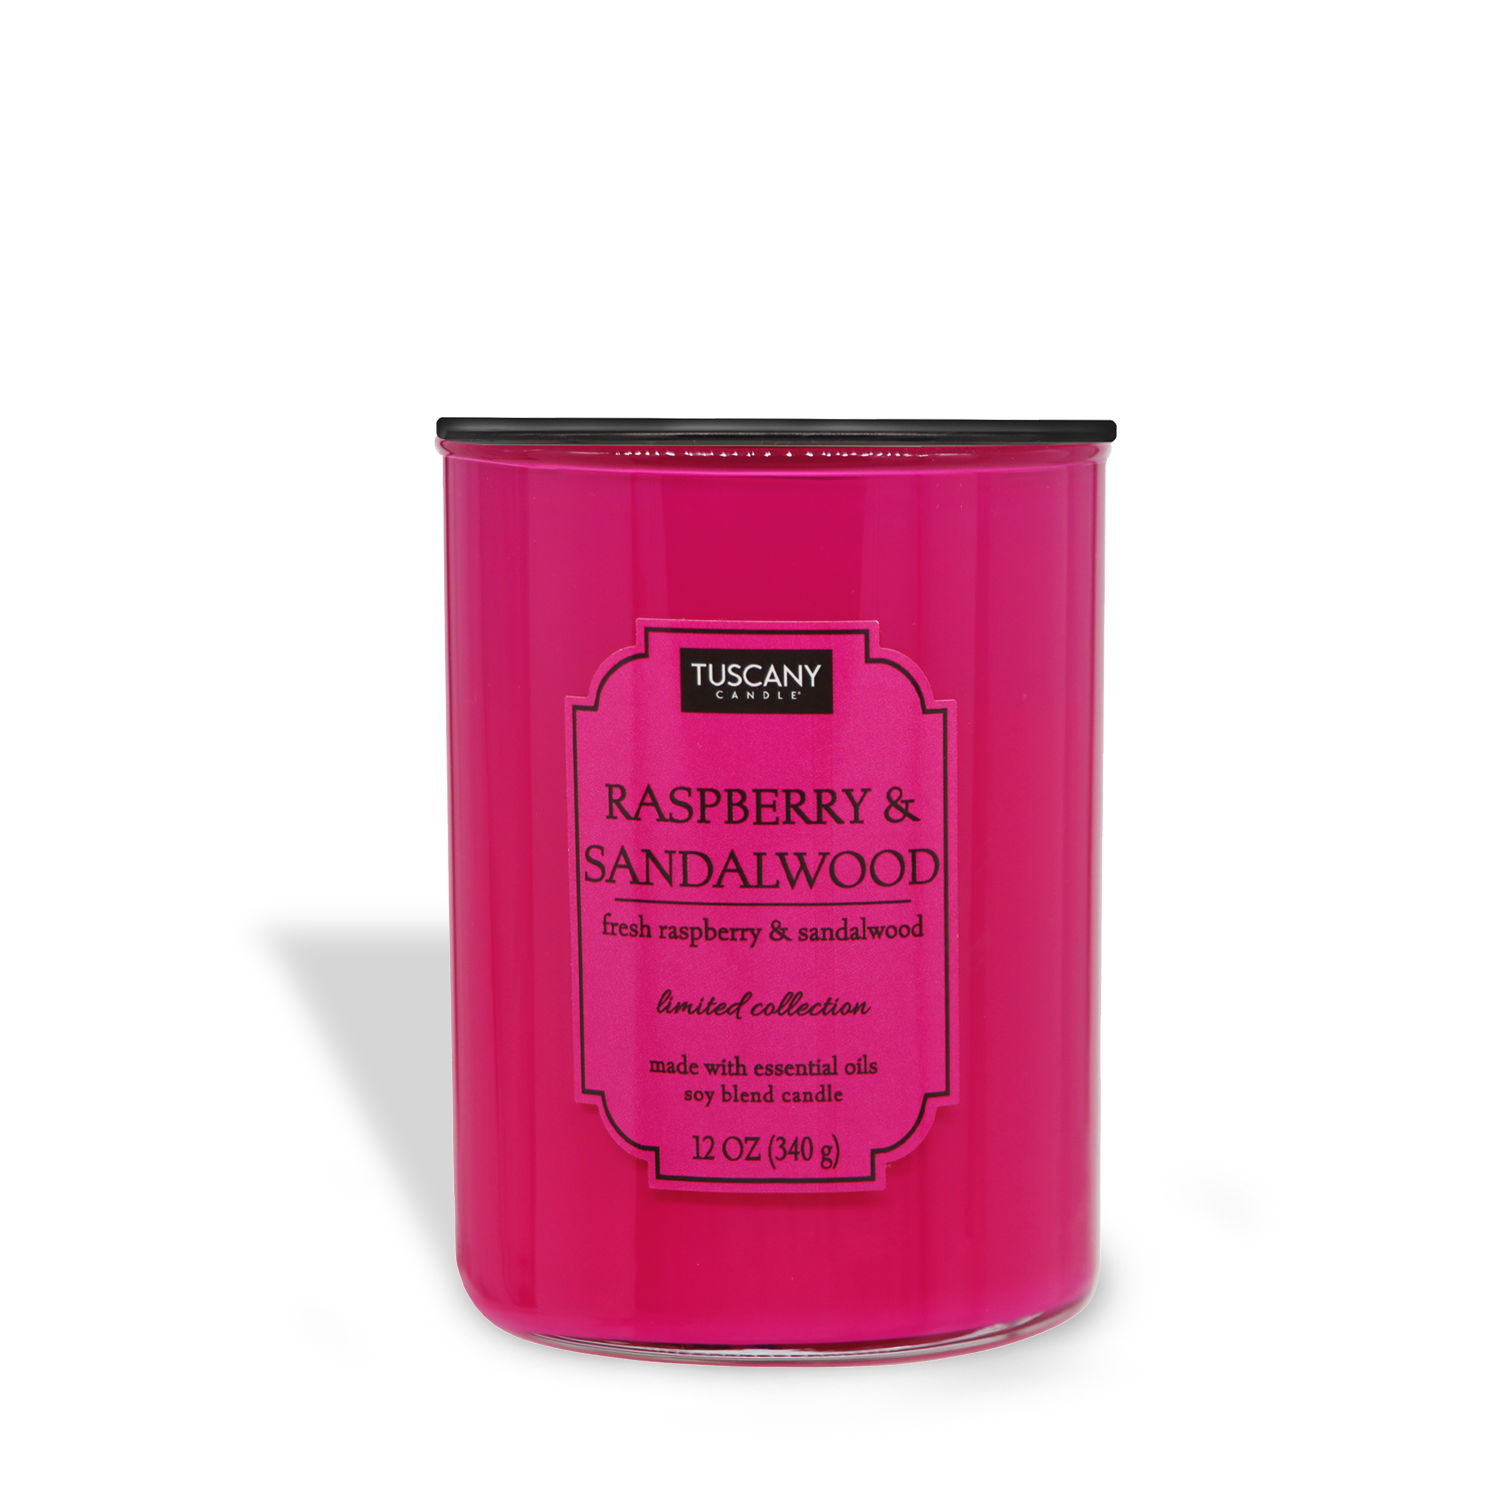 A vibrant pink Raspberry & Sandalwood (12 oz) Colorsplash collection candle, made with essential oils and soy blend, by Tuscany Candle® EVD.